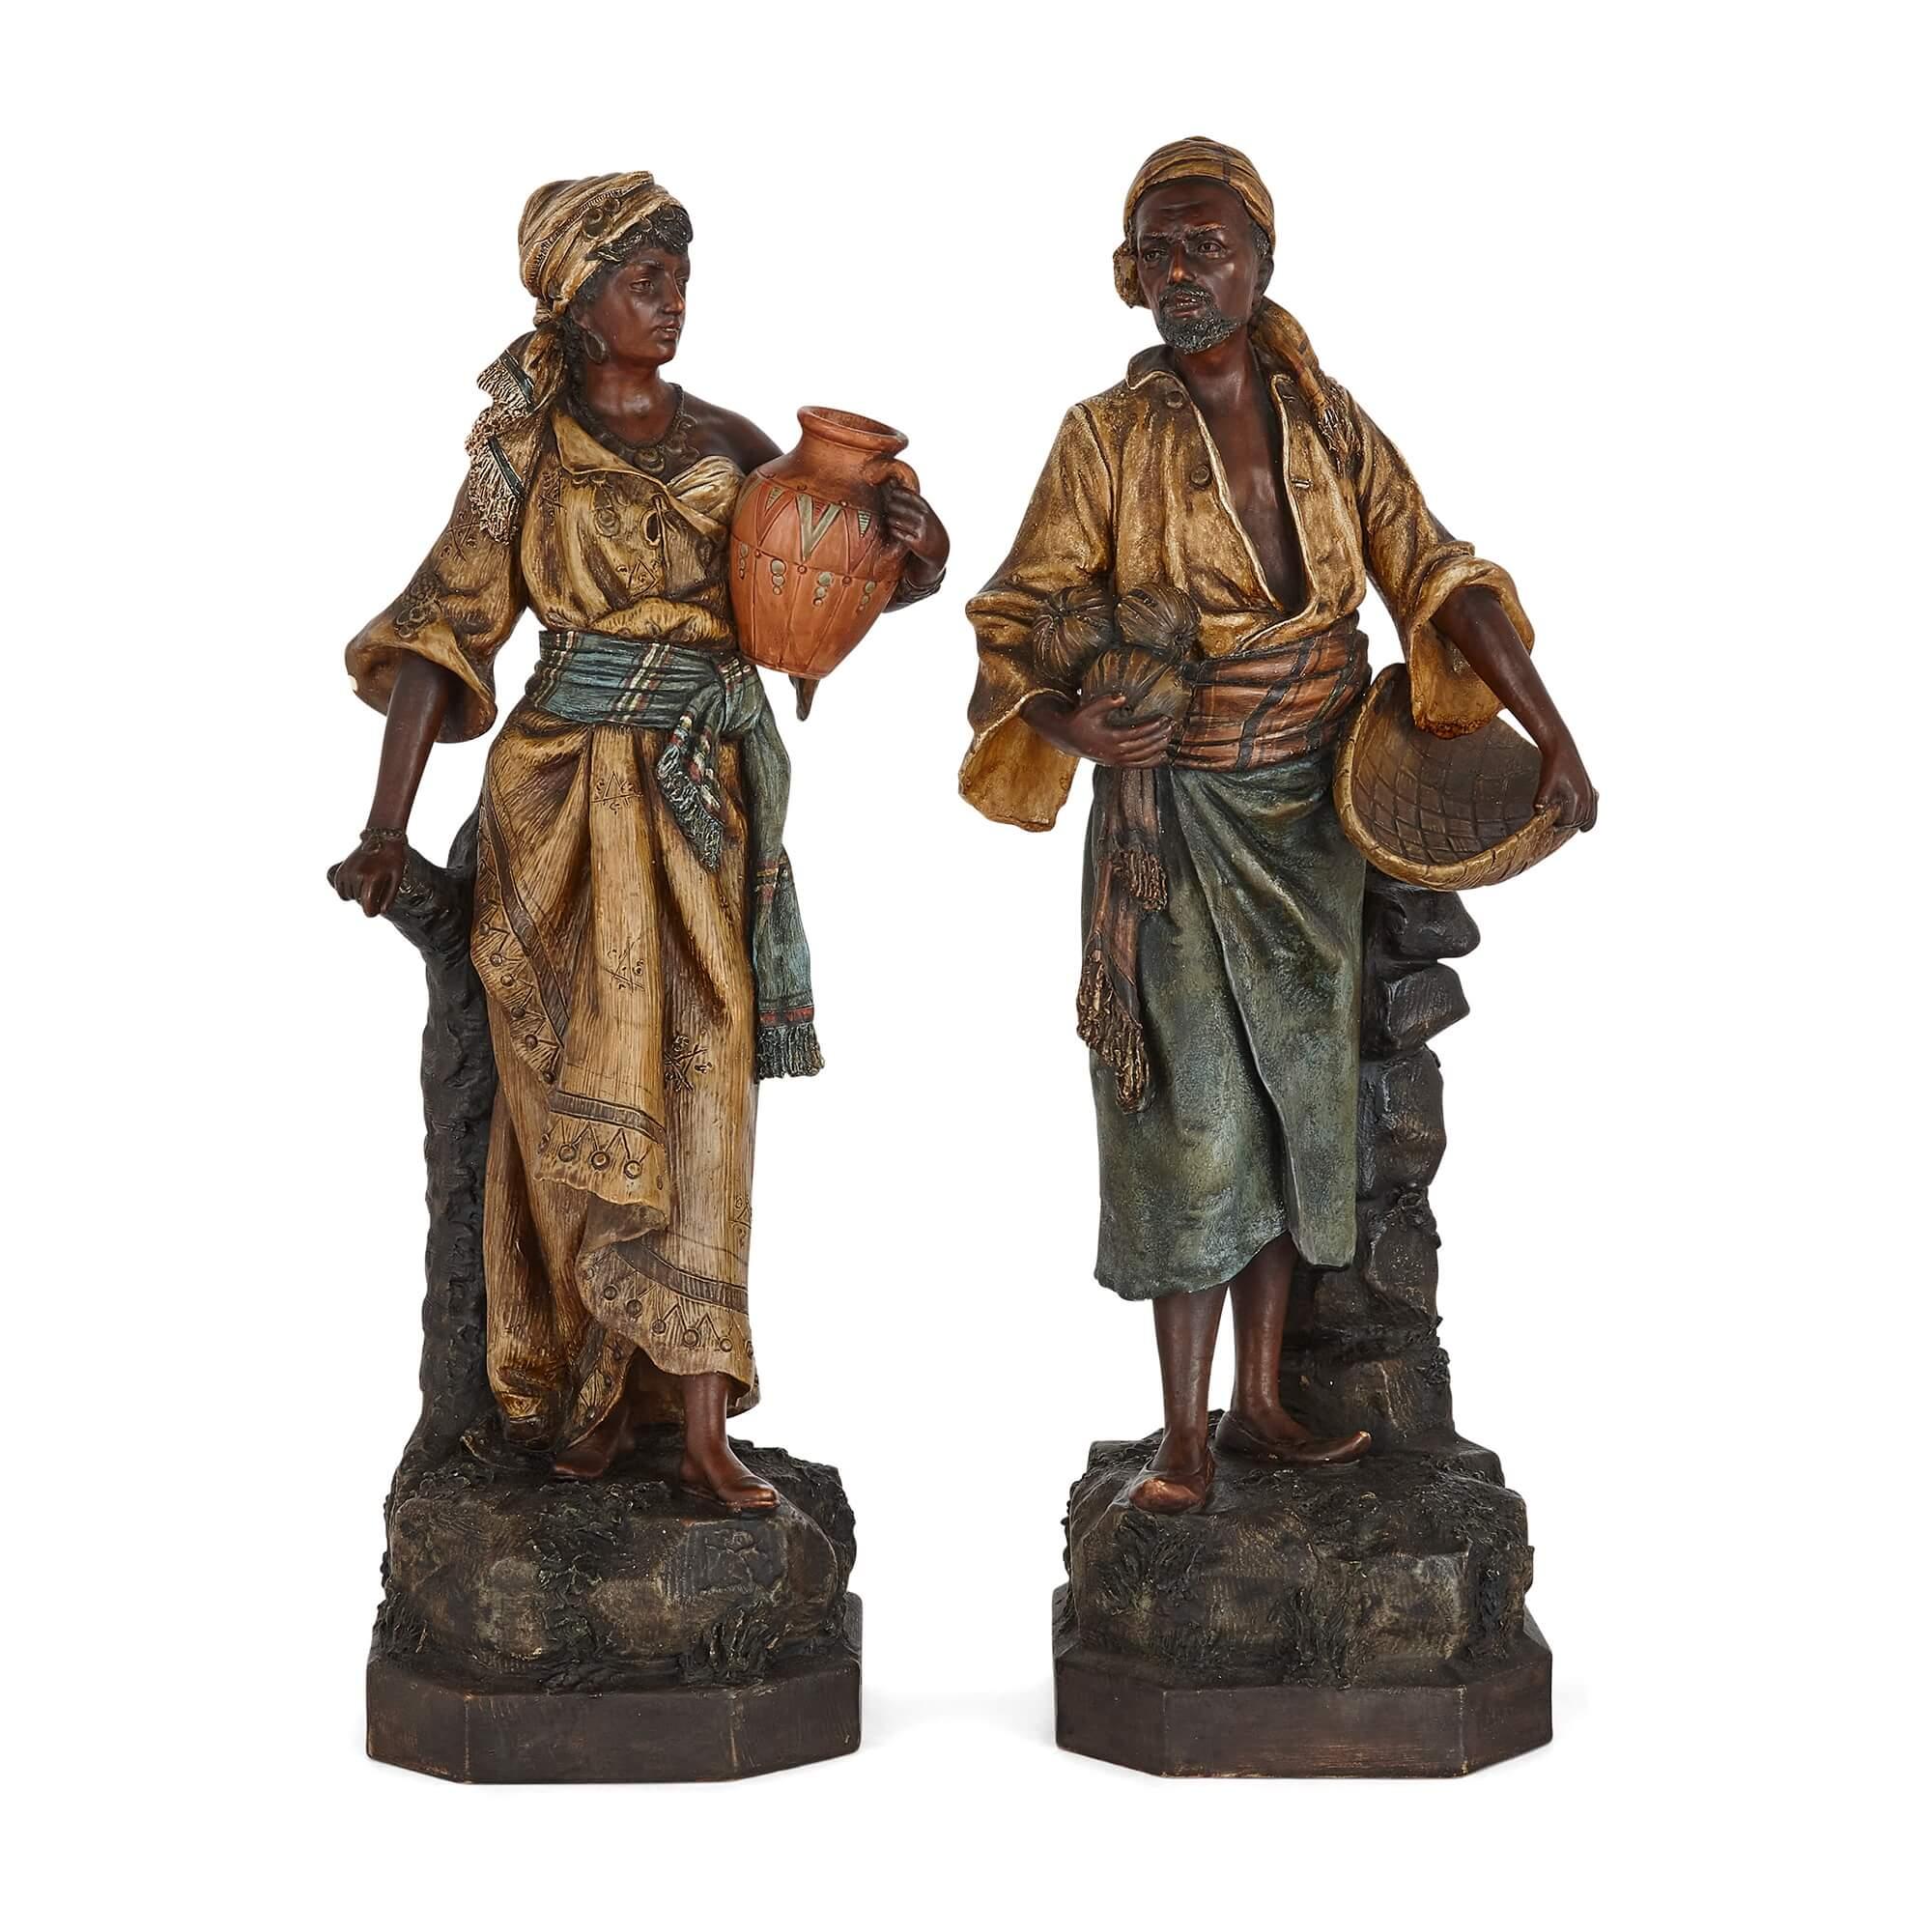 A pair of Orientalist terracotta figures by Johann Maresch
Austrian, Late 19th Century
Man: height 49cm, width 20cm, depth 15cm
Woman: height 48cm, width 20cm, depth 15cm

Depicting a woman and a man of similar appearance, age, dress, and in a